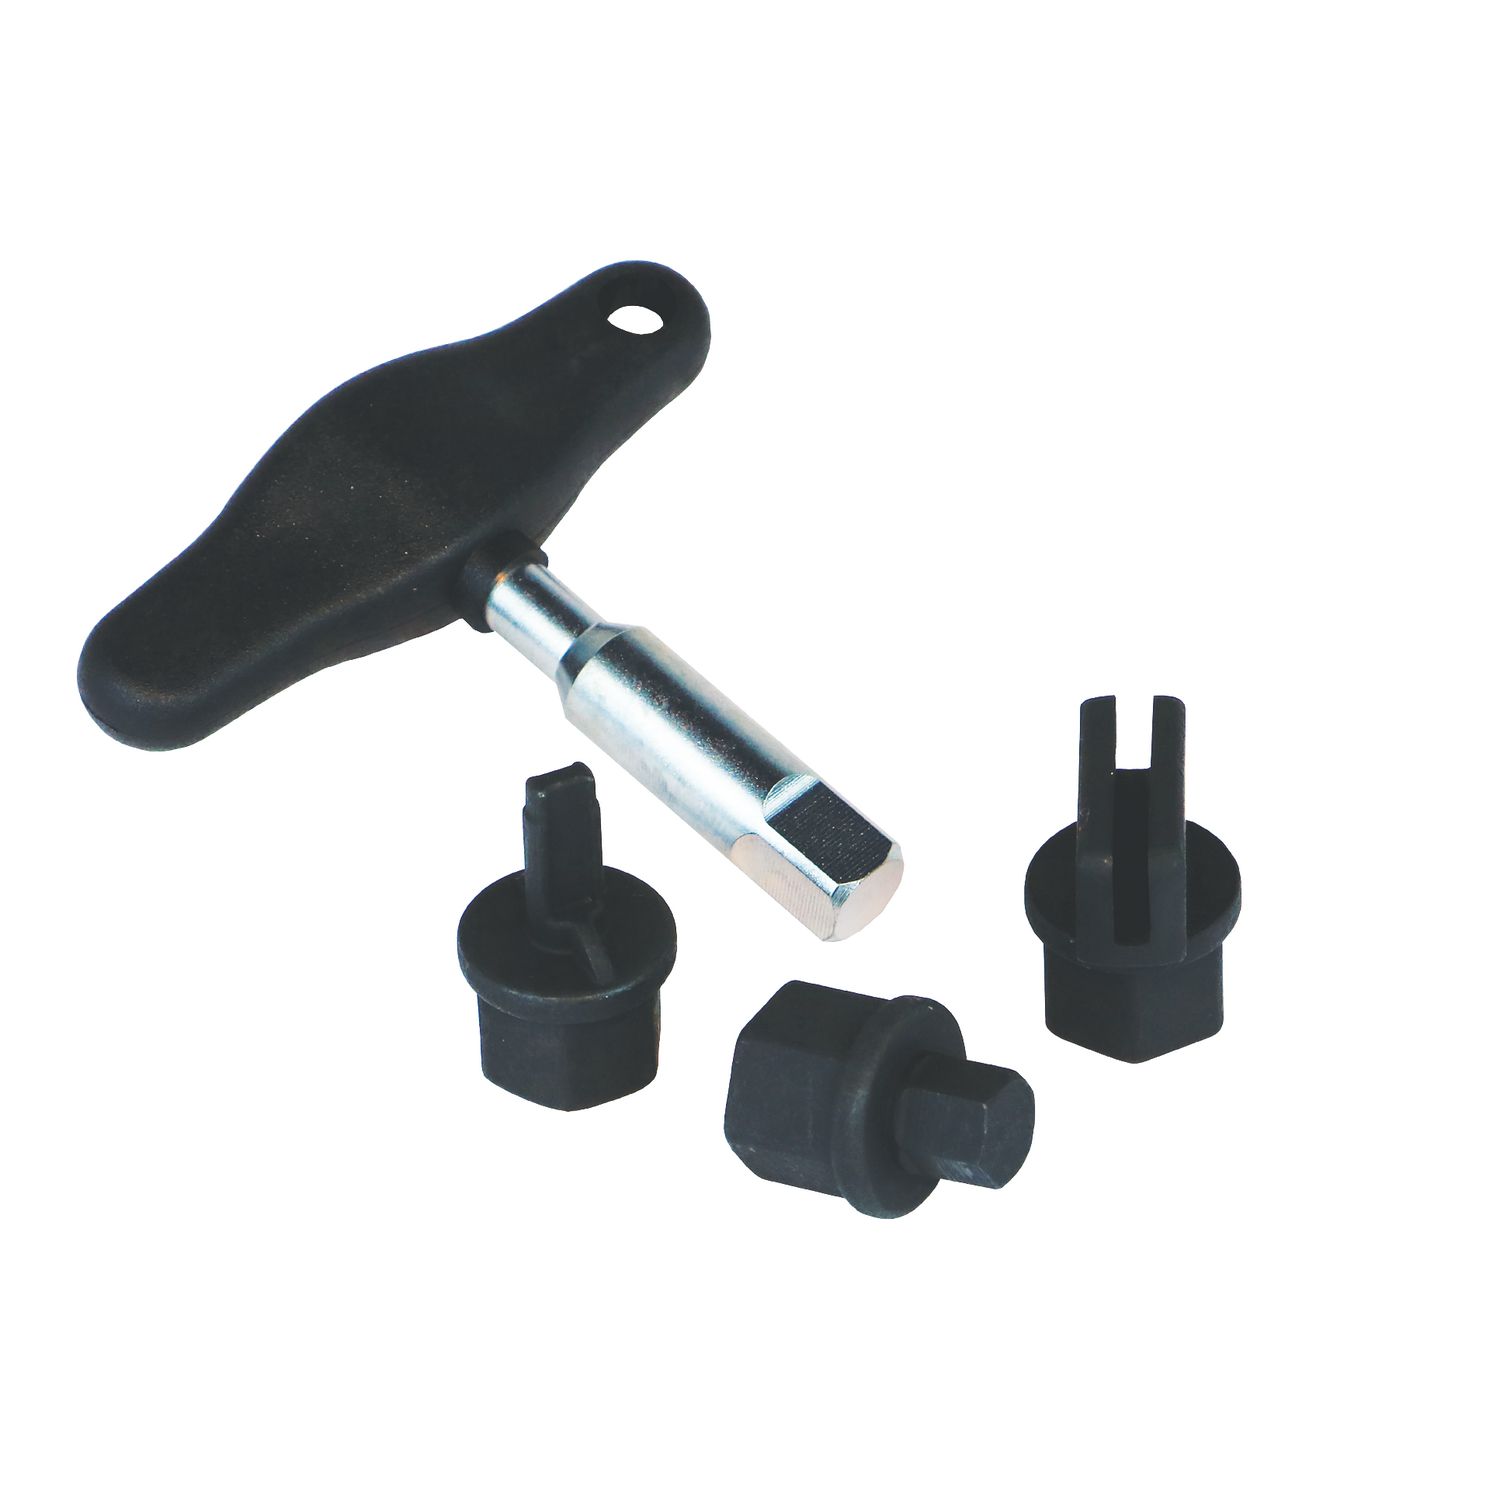 Steelman 42439 6-Piece Oil Drain Plug Wrench Kit for Installing and Removing Plastic Oil Drain Plugs and Bolts